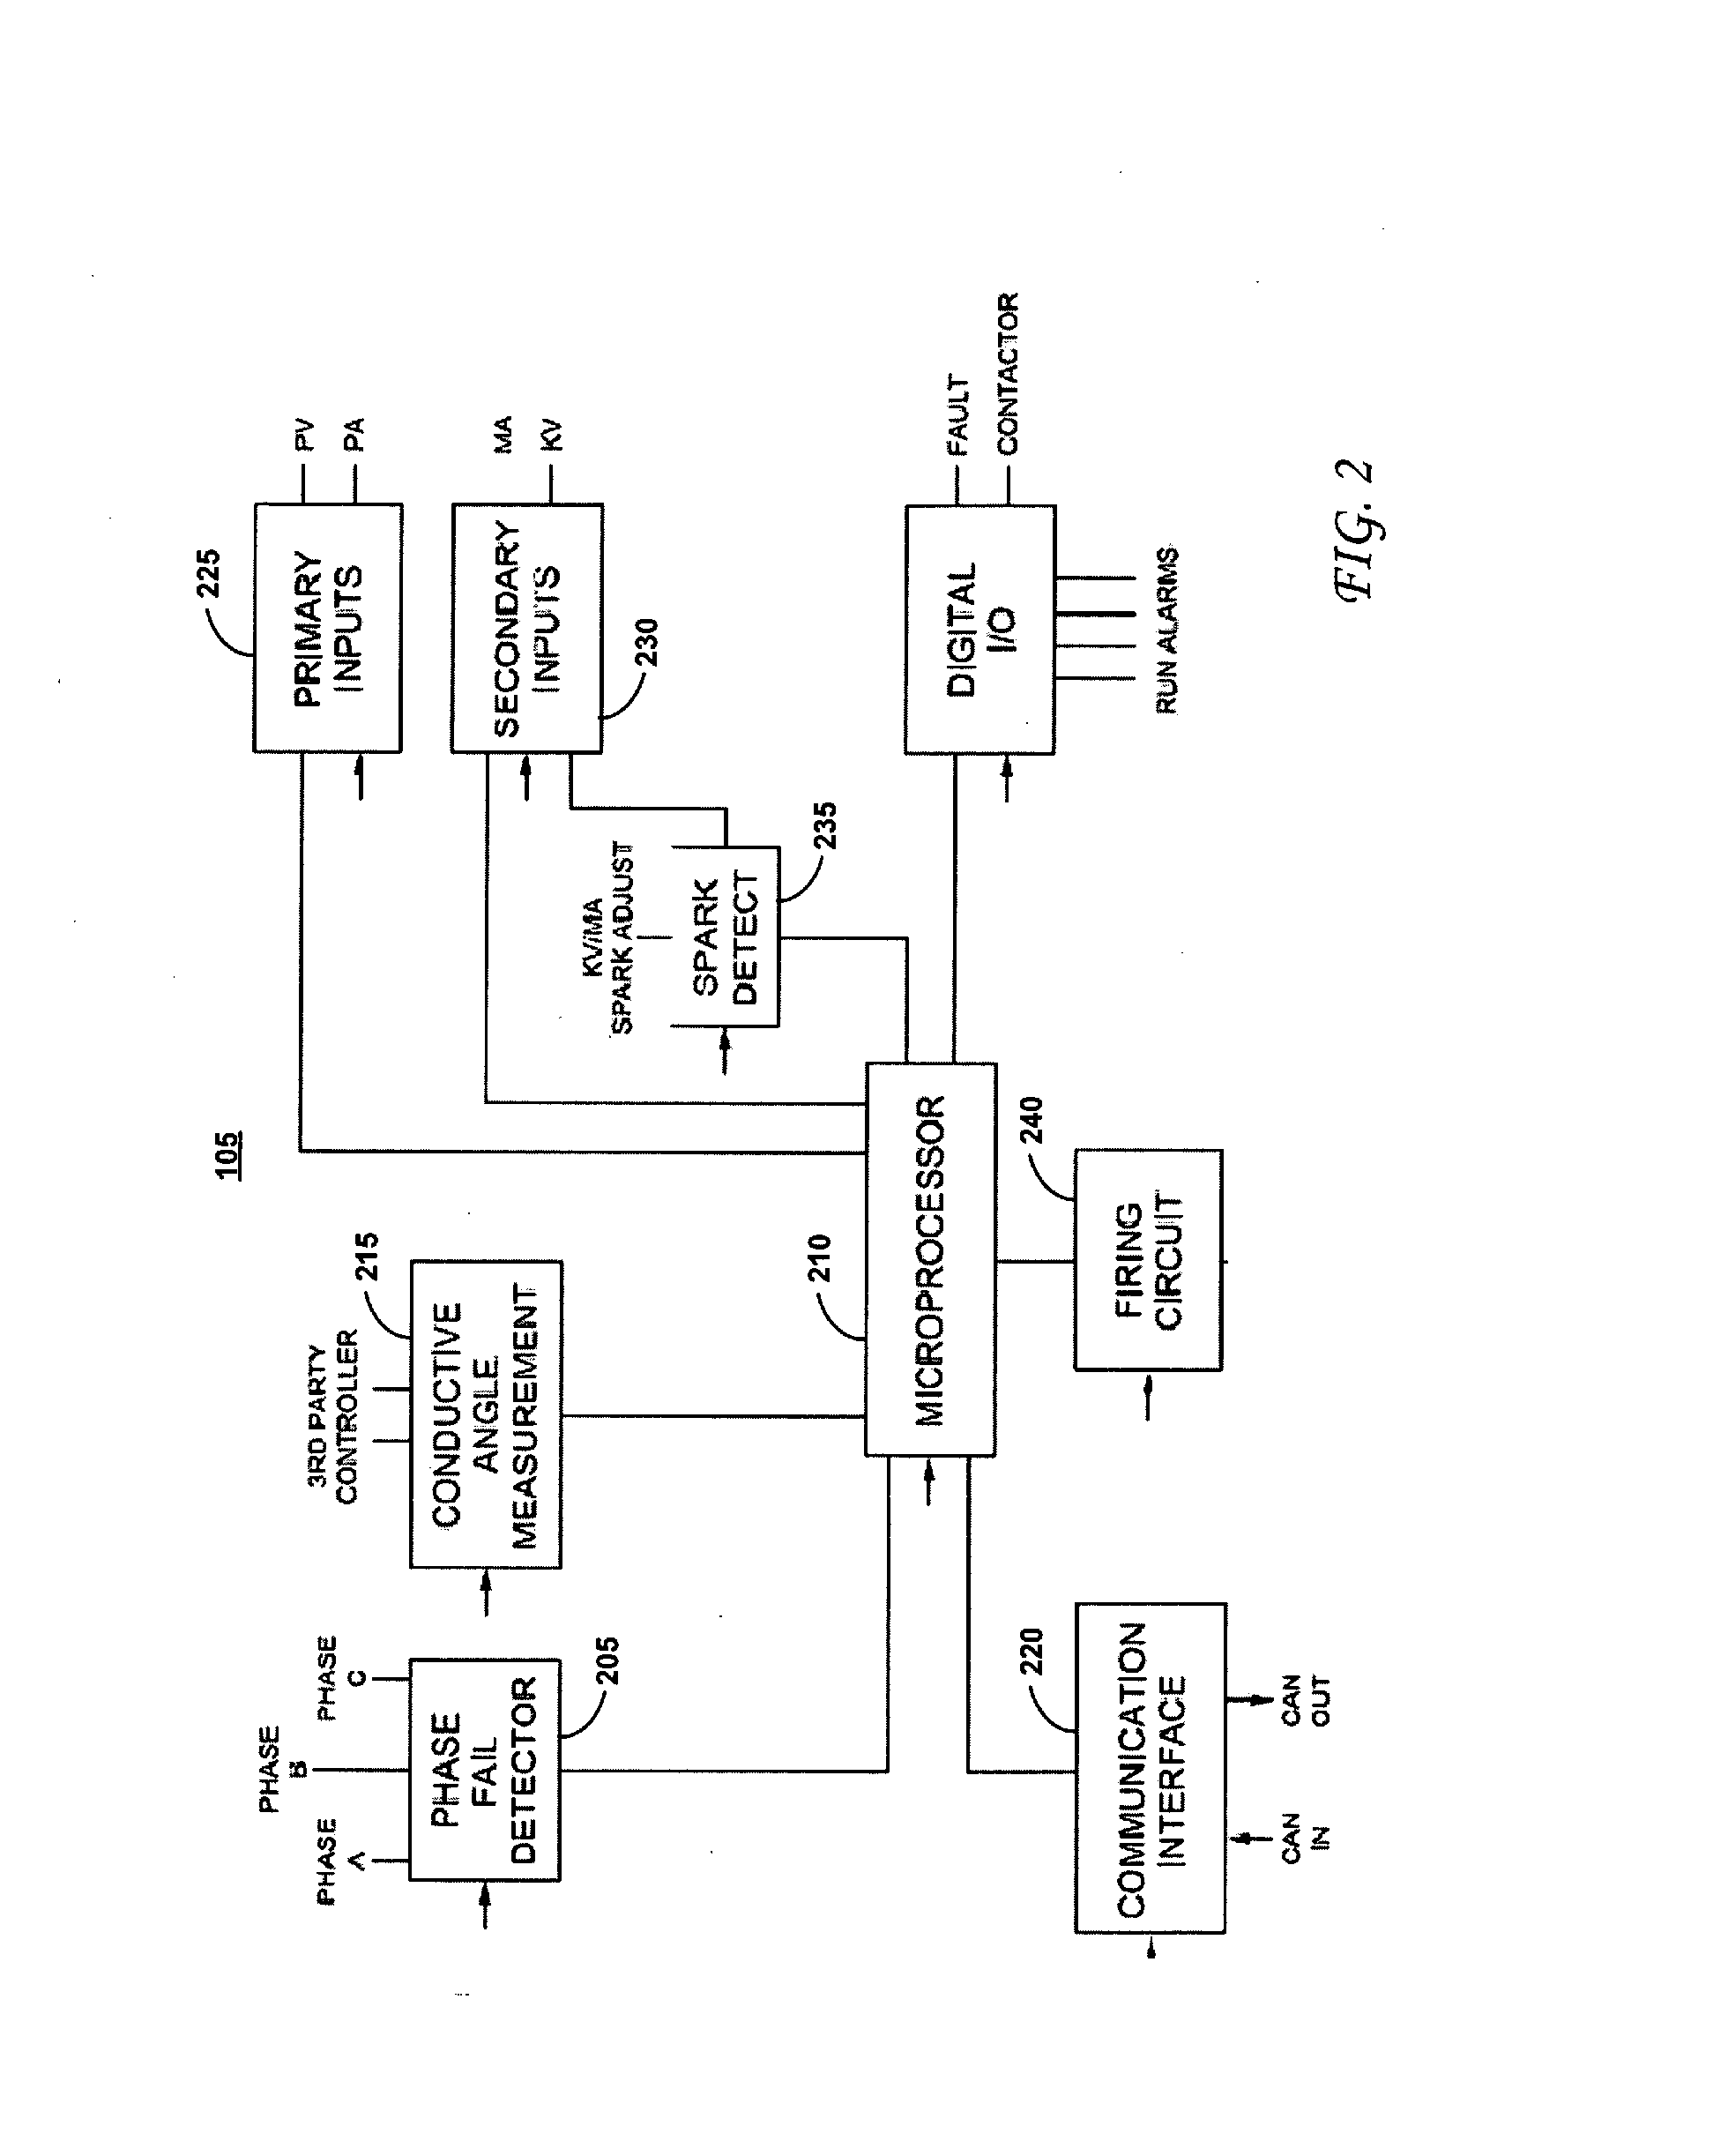 Systems and methods of power conversion for electrostatic precipitators